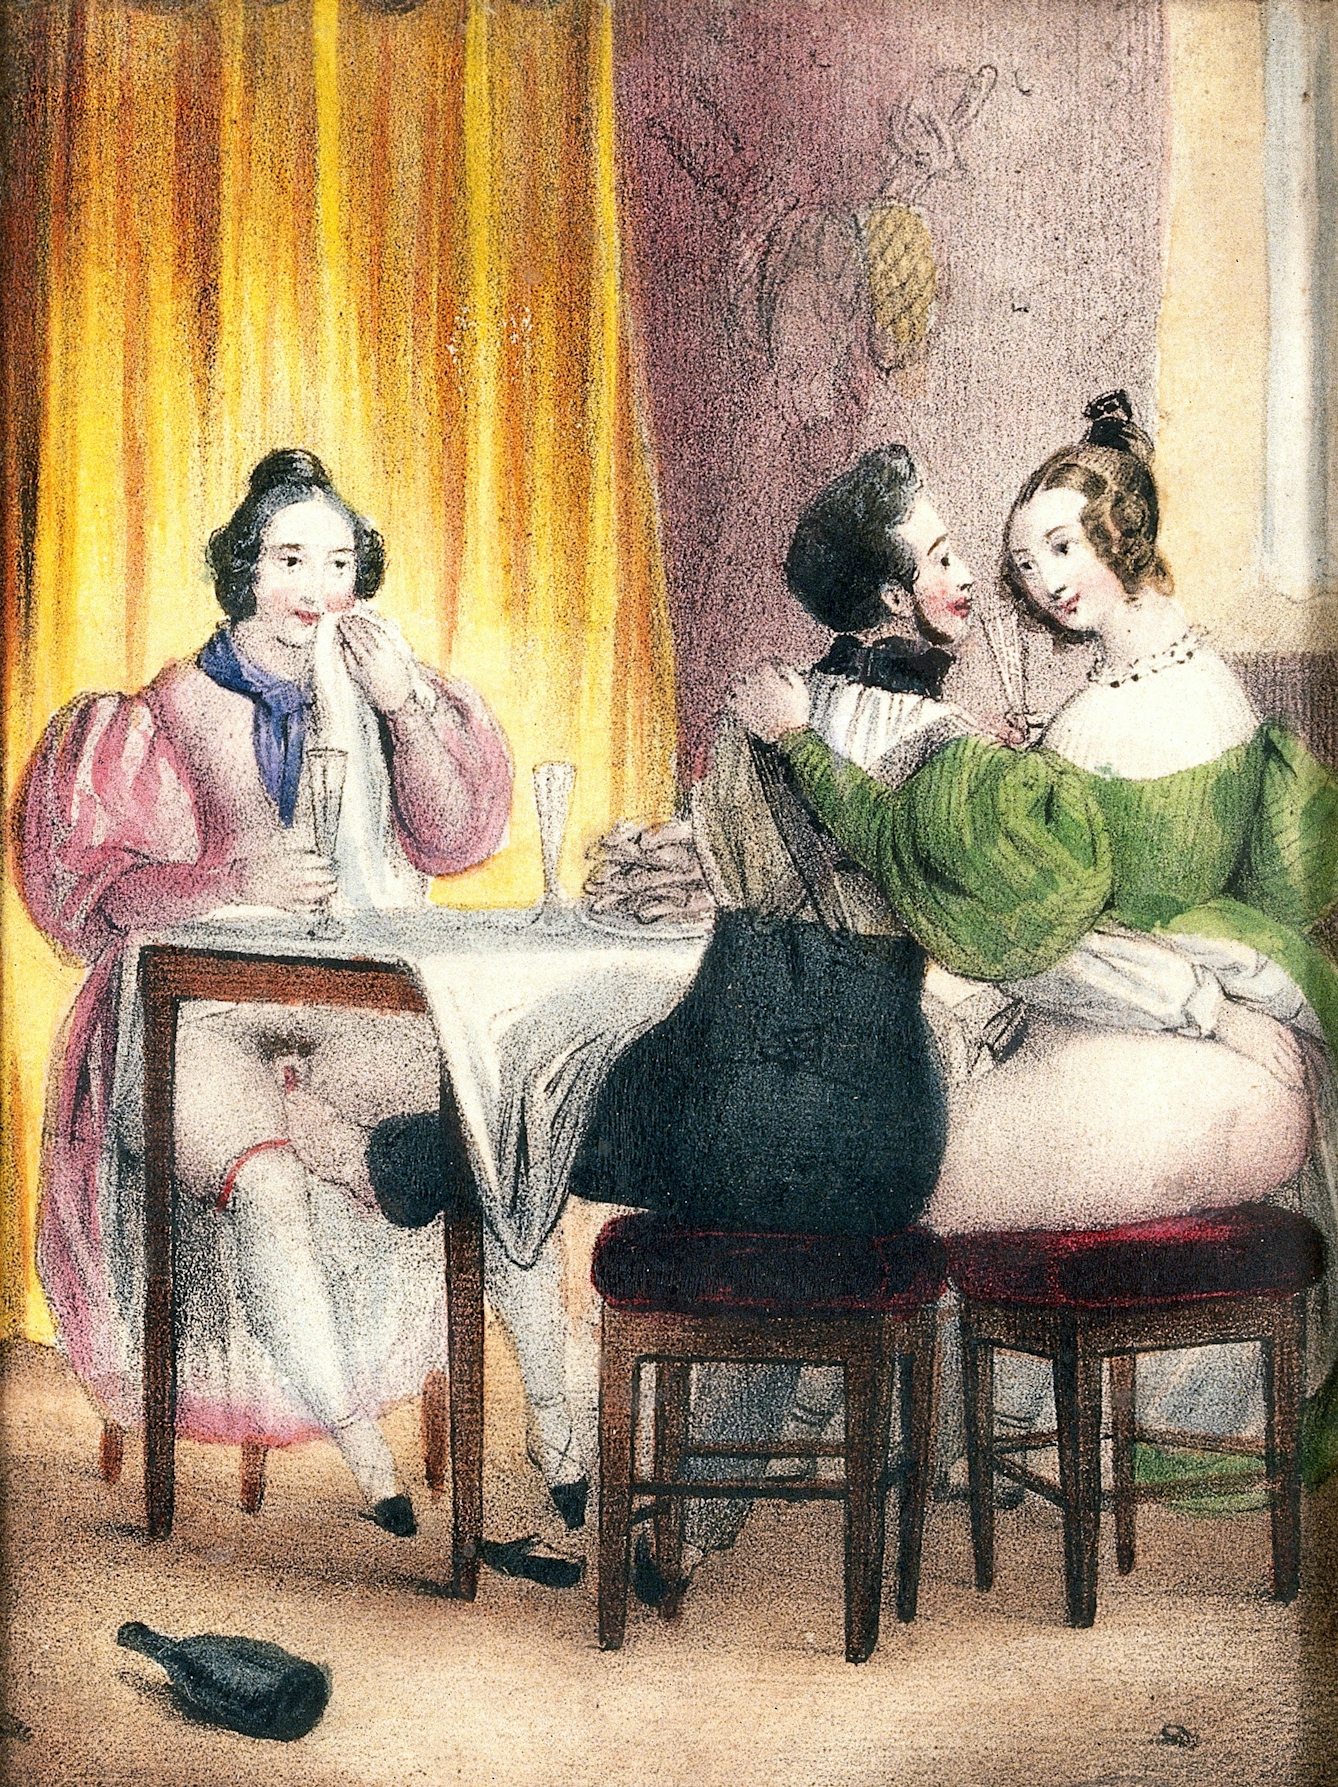 While dining with two women, a man pleasures one of them with his foot. Coloured lithograph, c.1830